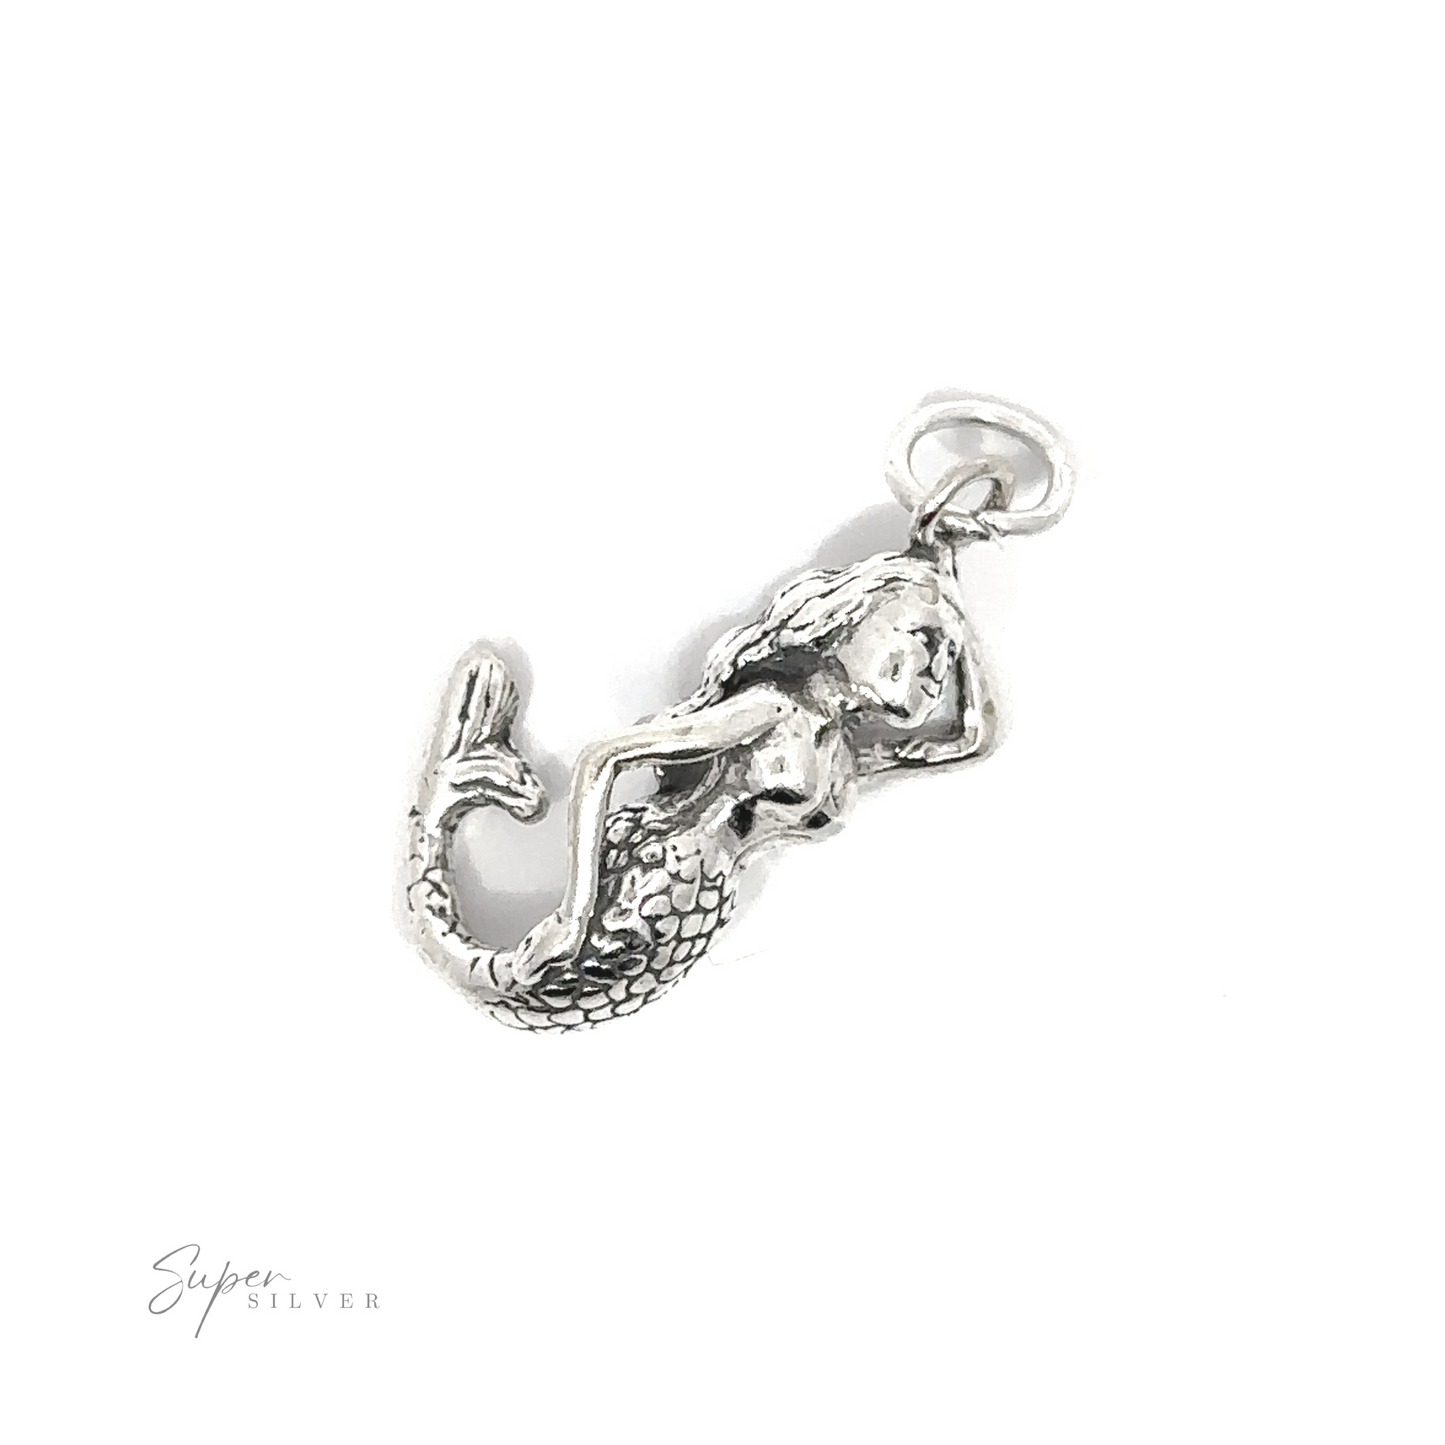 An enchanting Small Mermaid Charm on a white background.